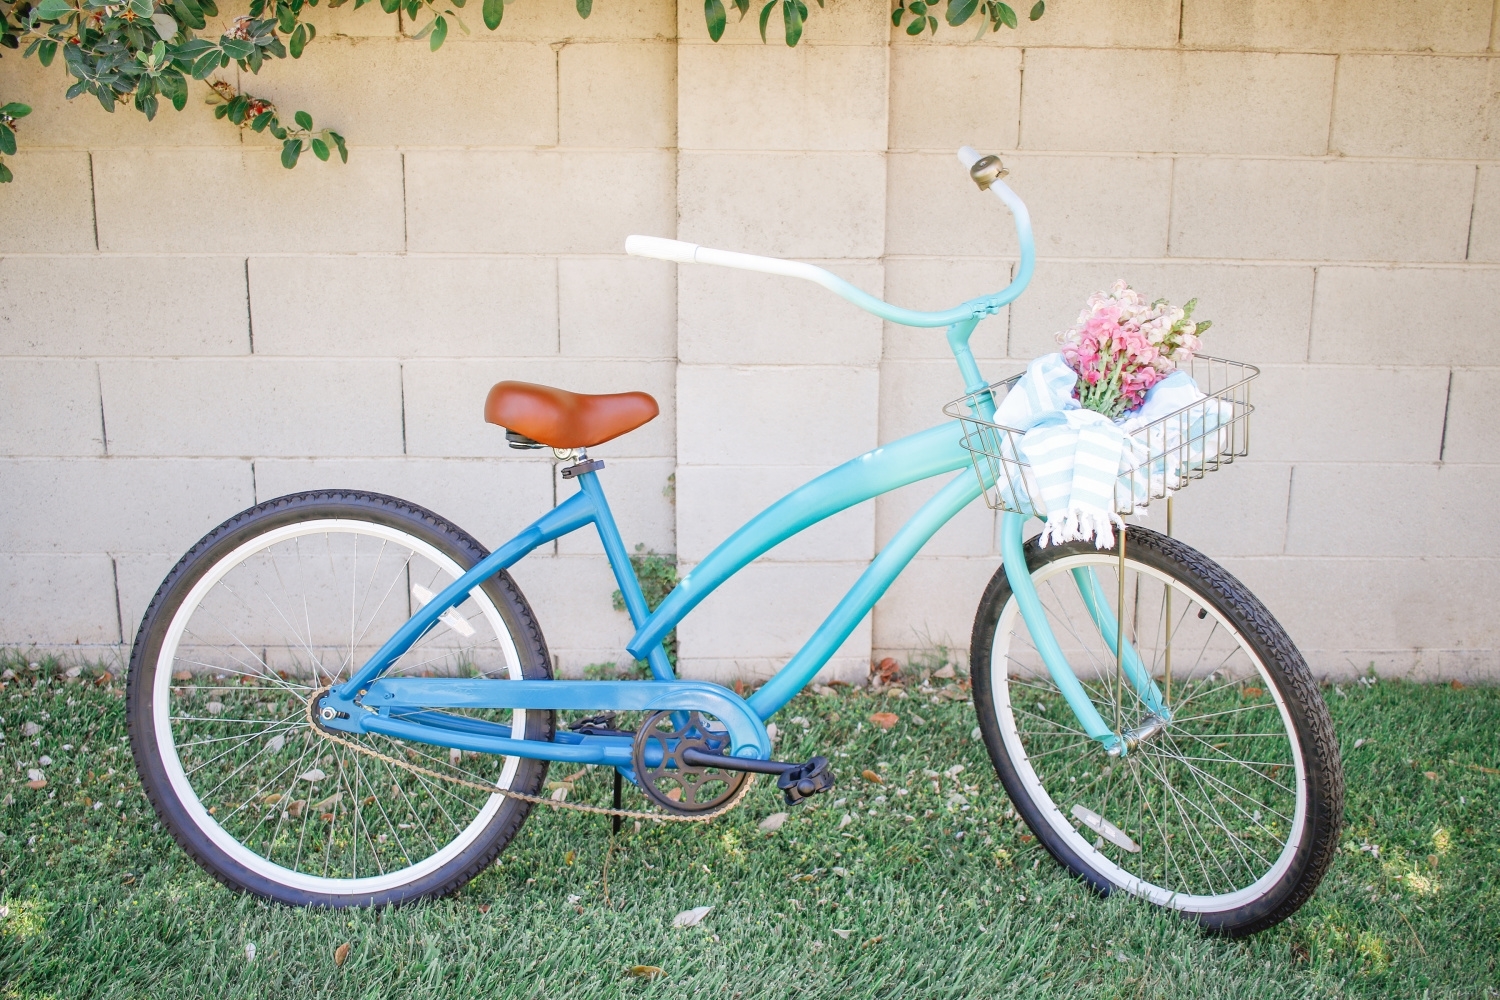 Restored Bike with Ombré Spray Paint